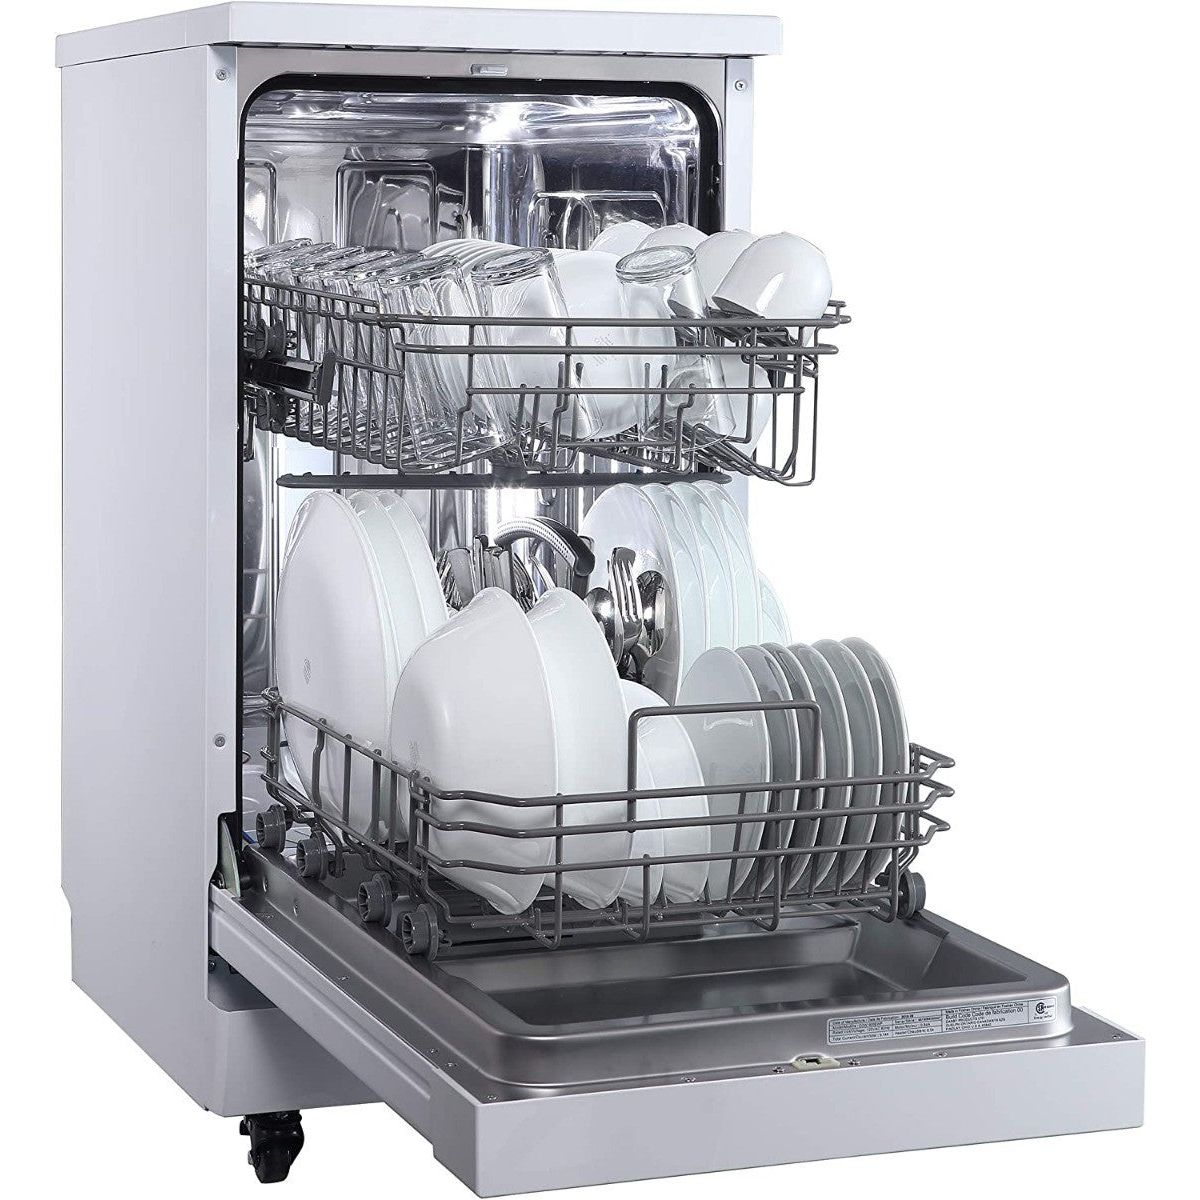 RCA18 in. White Electronic Portable 120-volt Dishwasher 3-Cycles - 8 Place Settings RDW1809